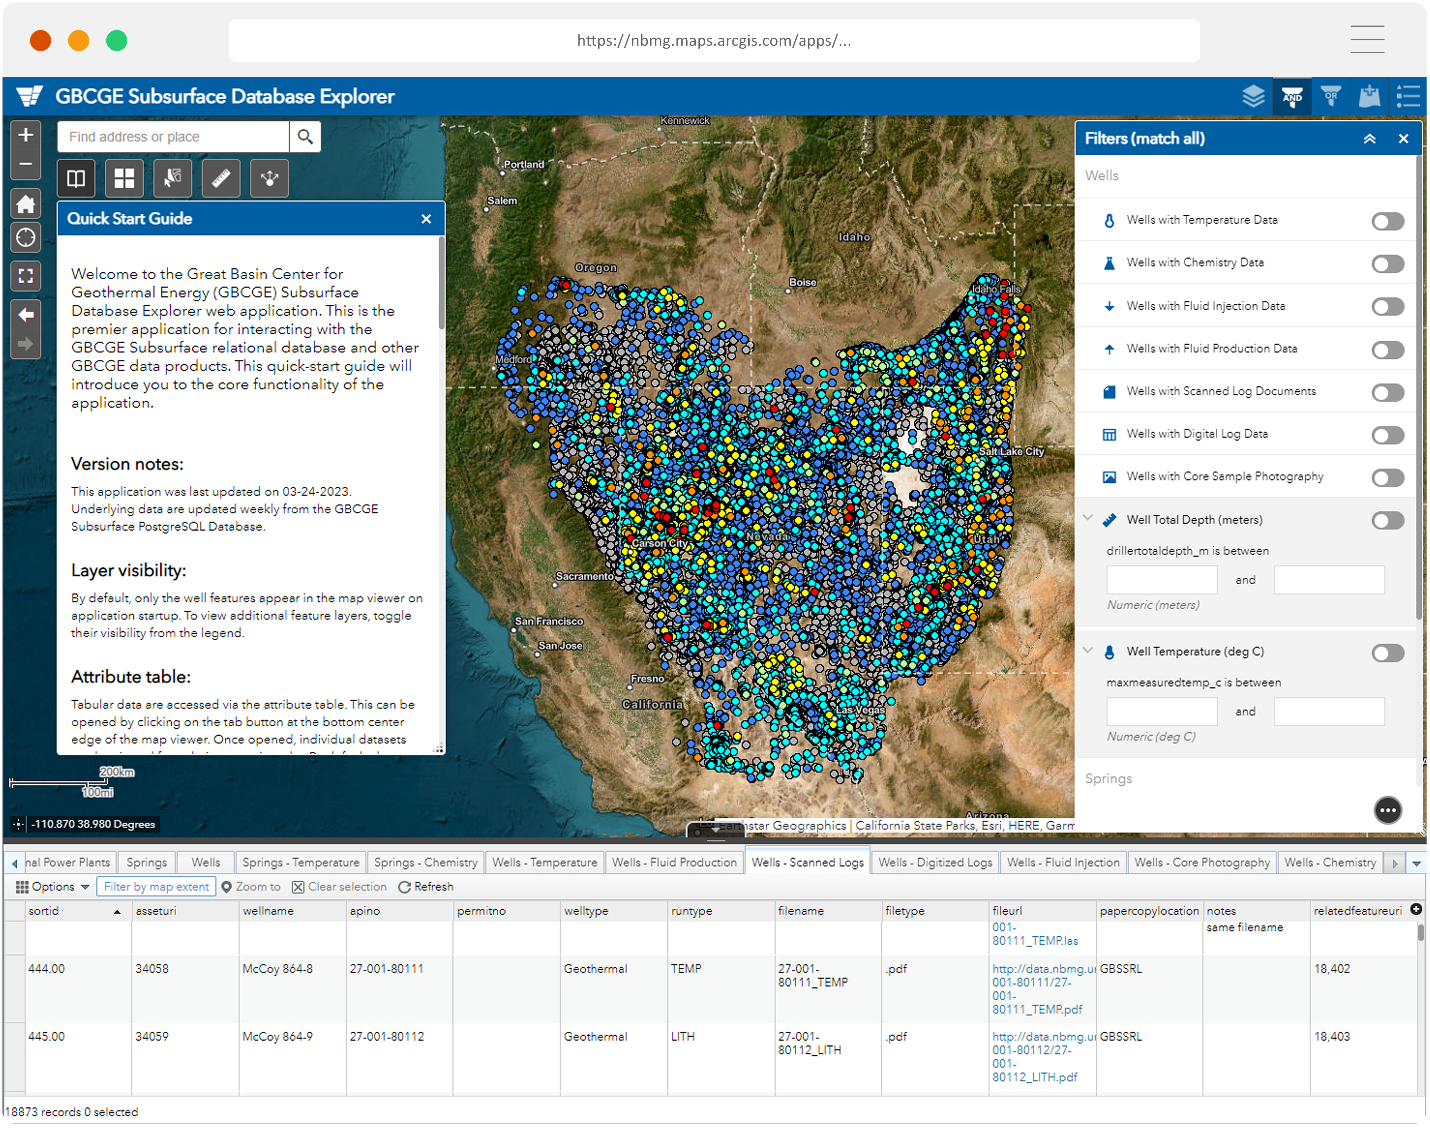 Photo of the GBCGE sub-surface data explorer web application.